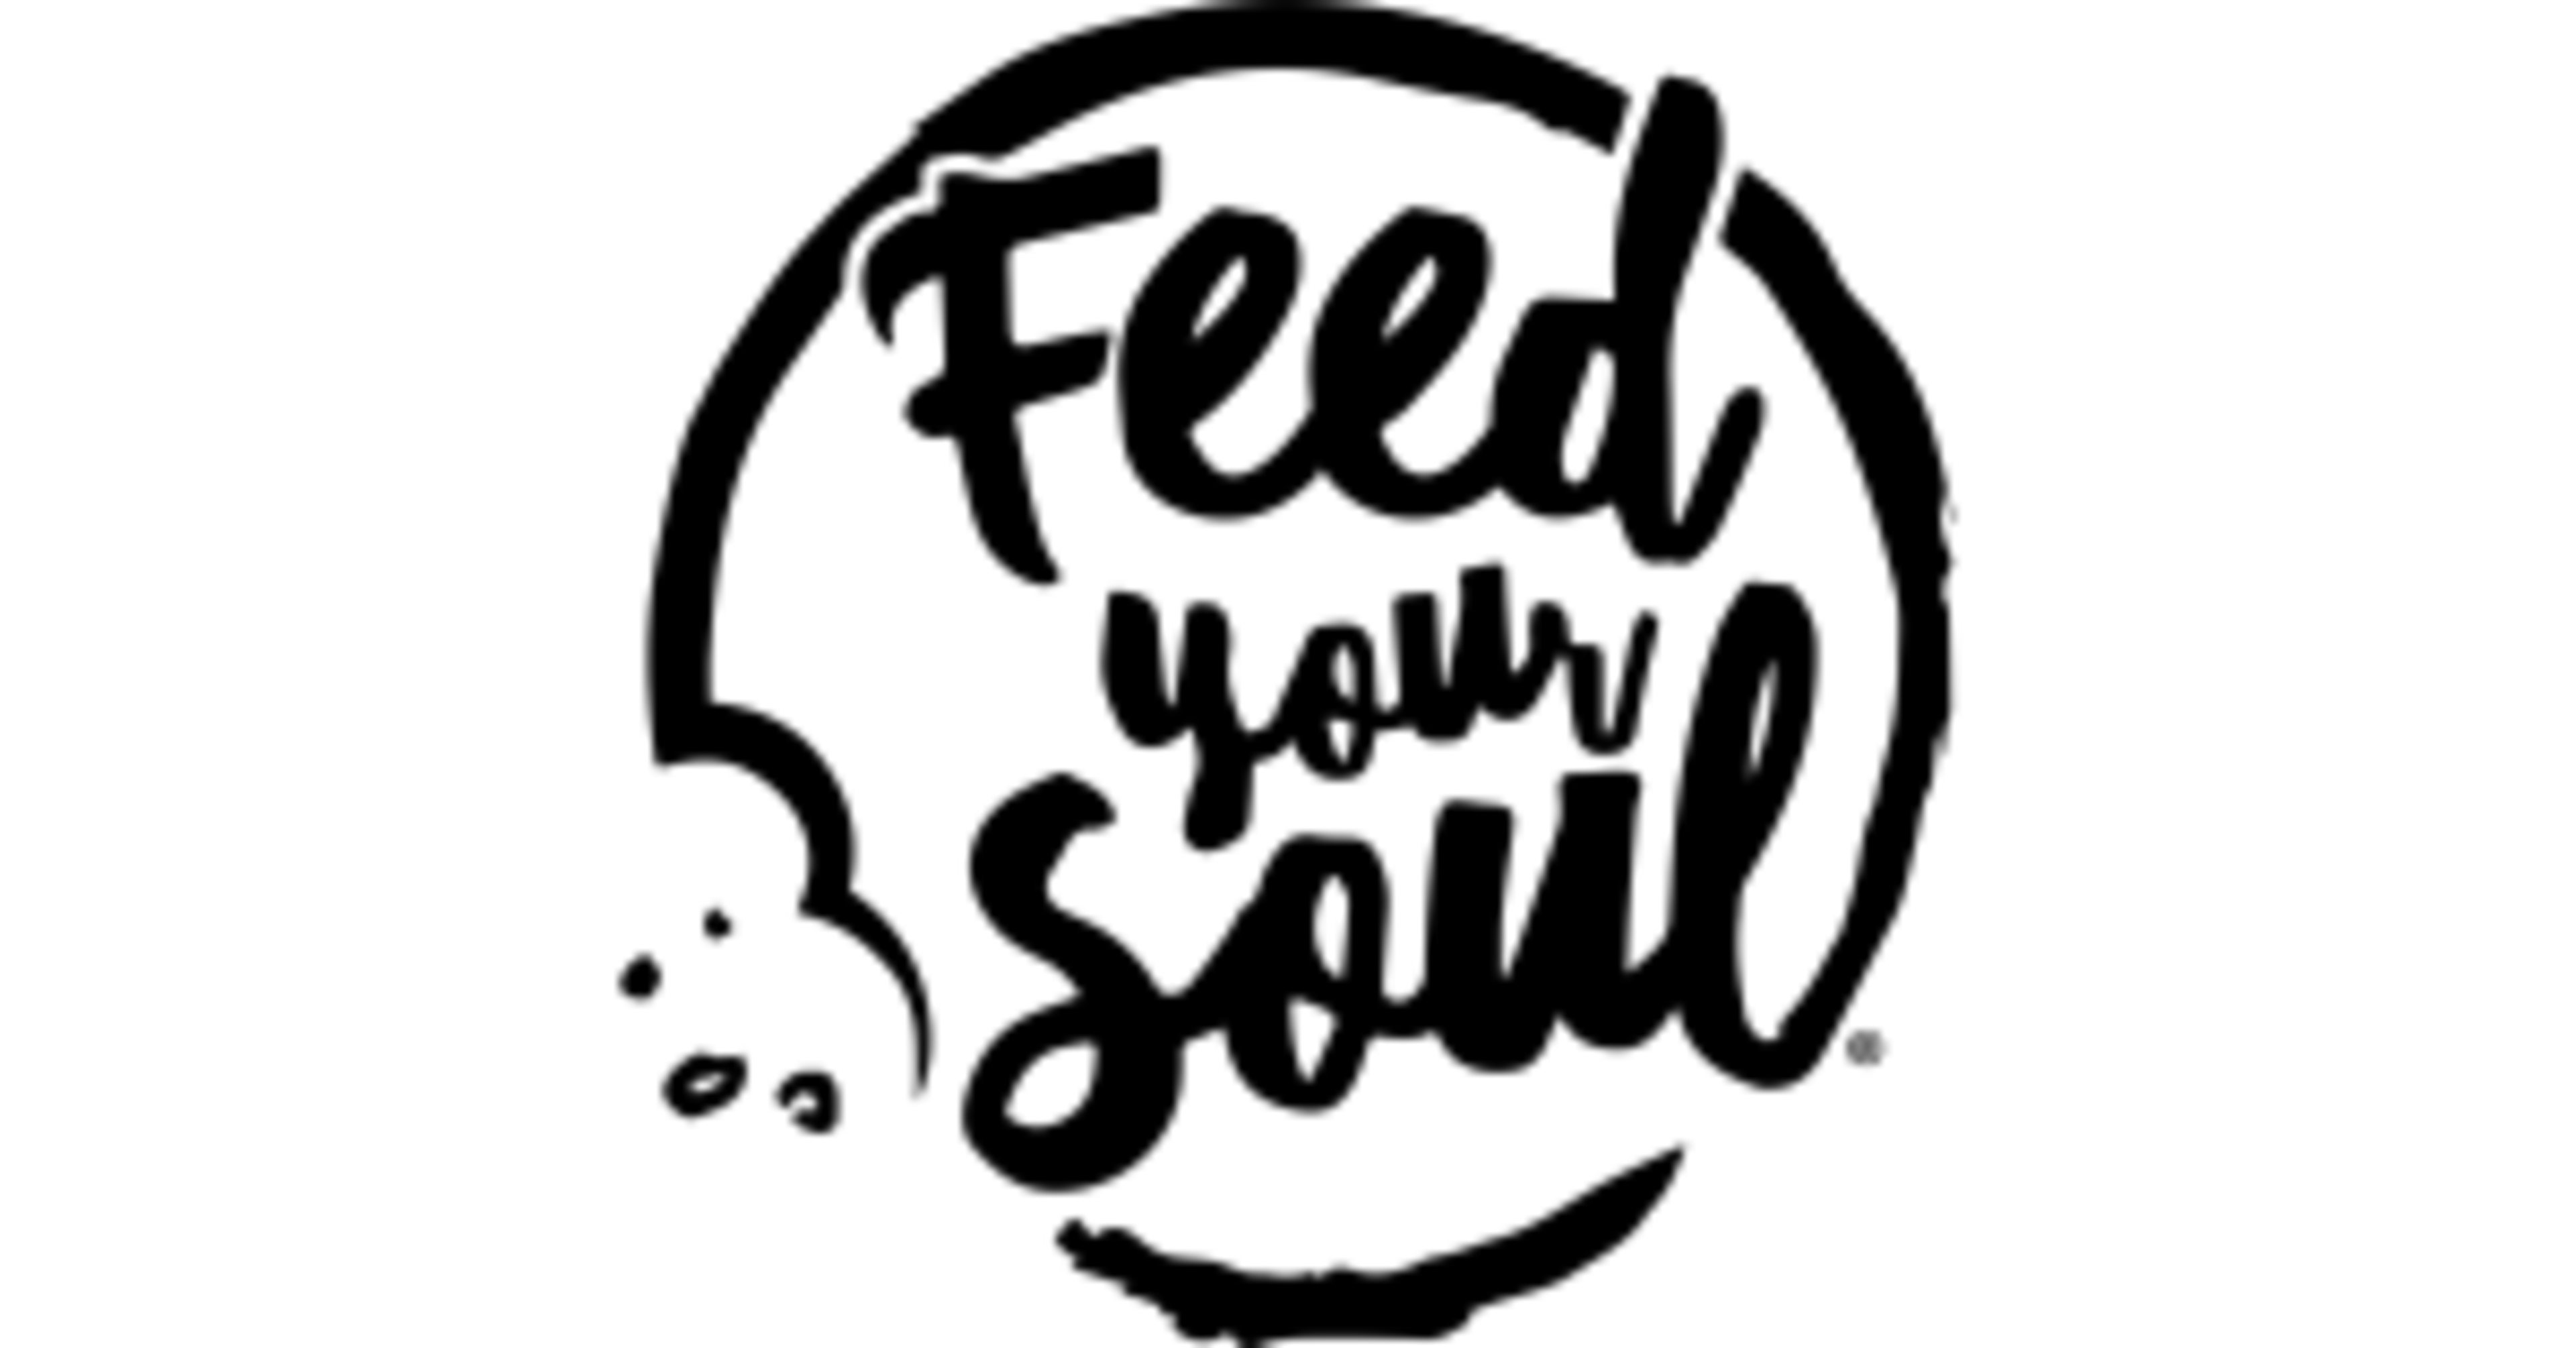 Feed Your Soul Bakery US Code